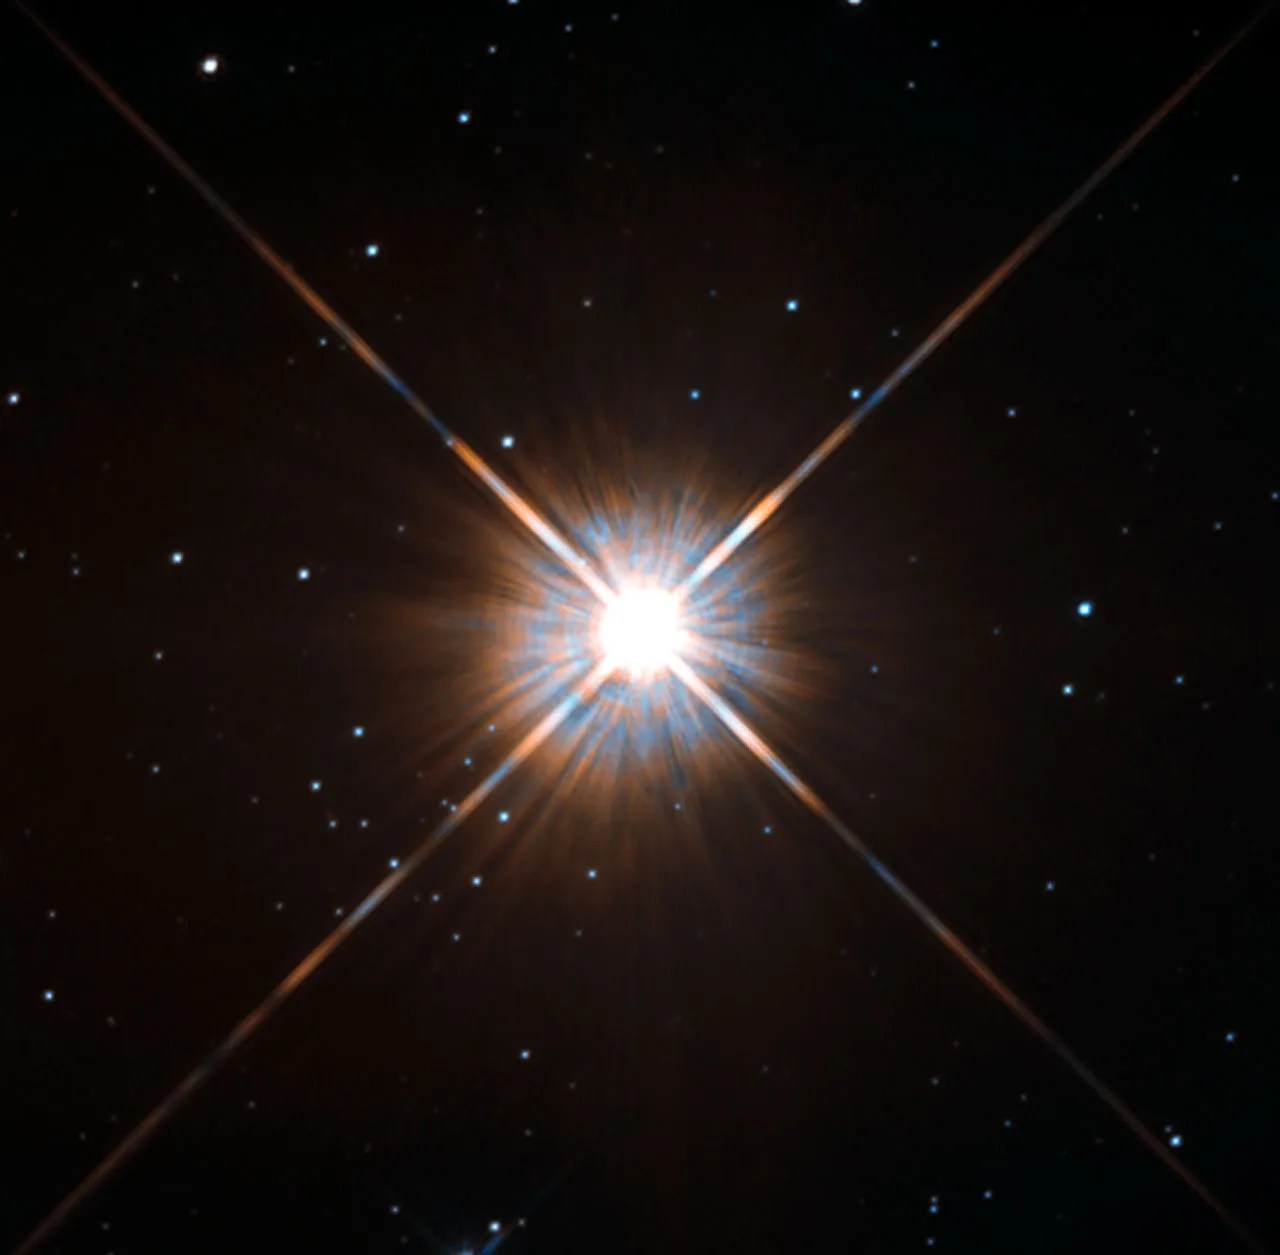 Brilliant blue-white star with x-shaped lens flare